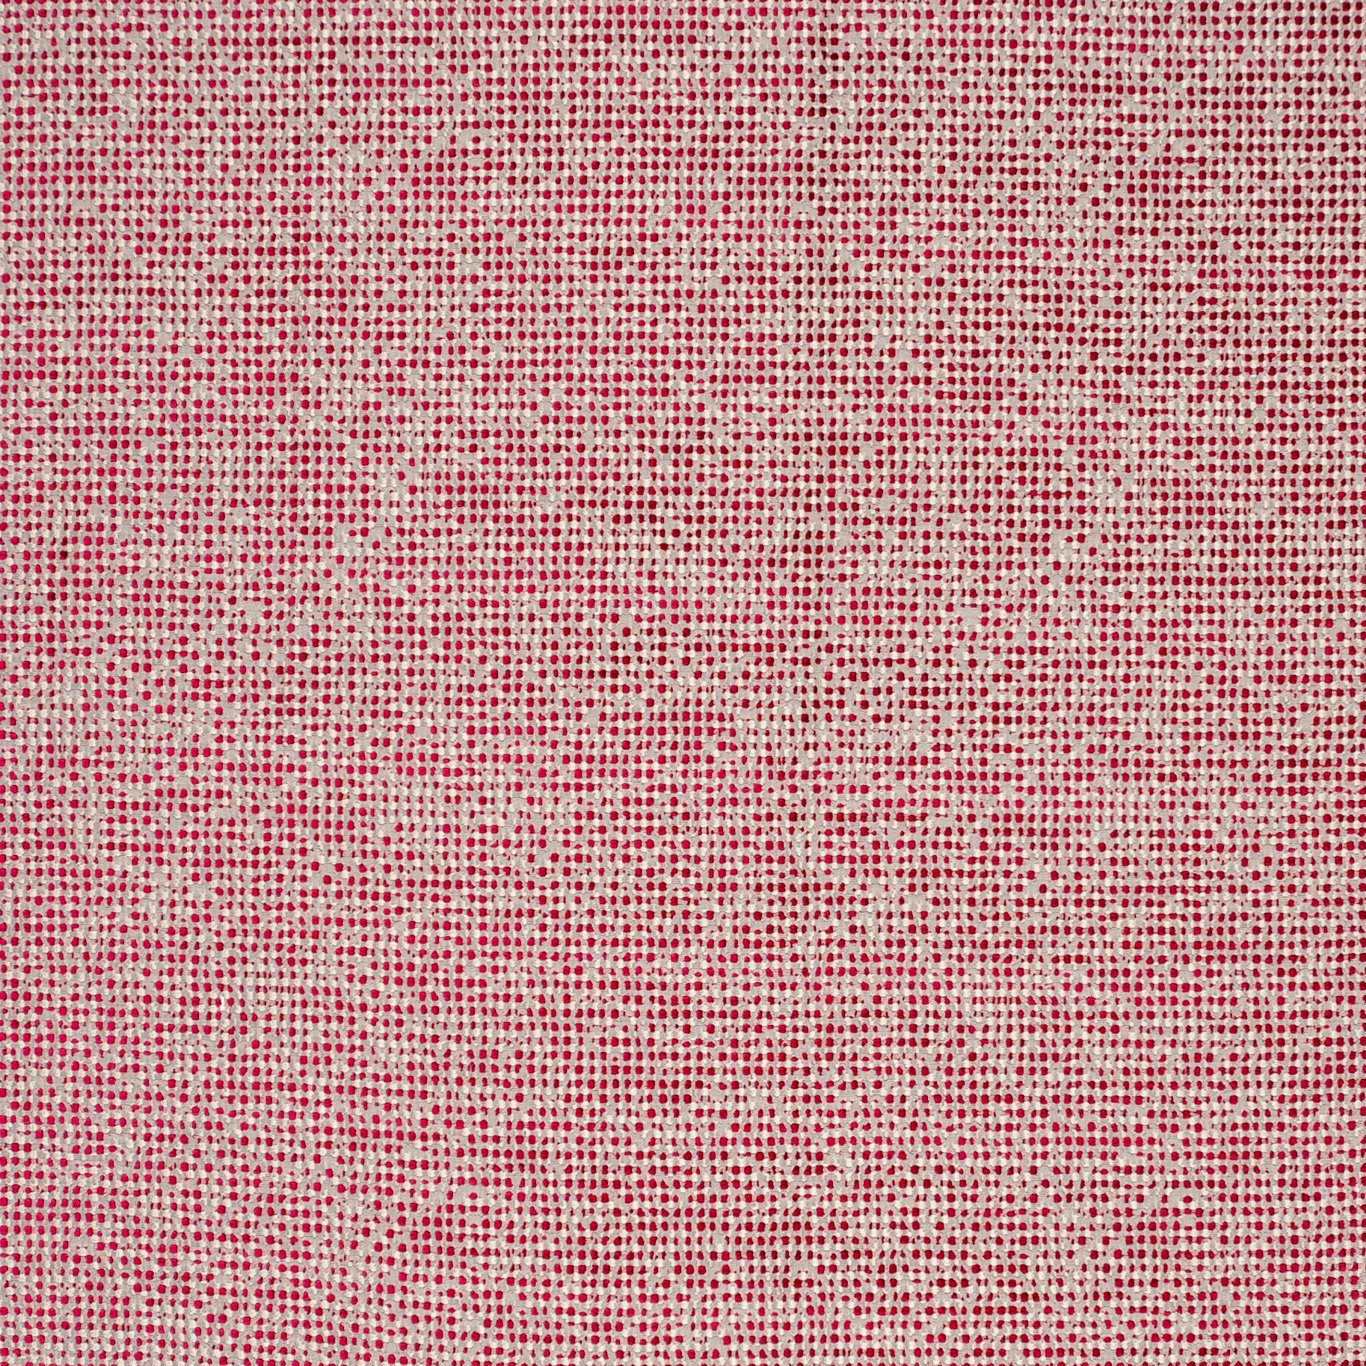 Beauvoir Passion Fabric by CNC